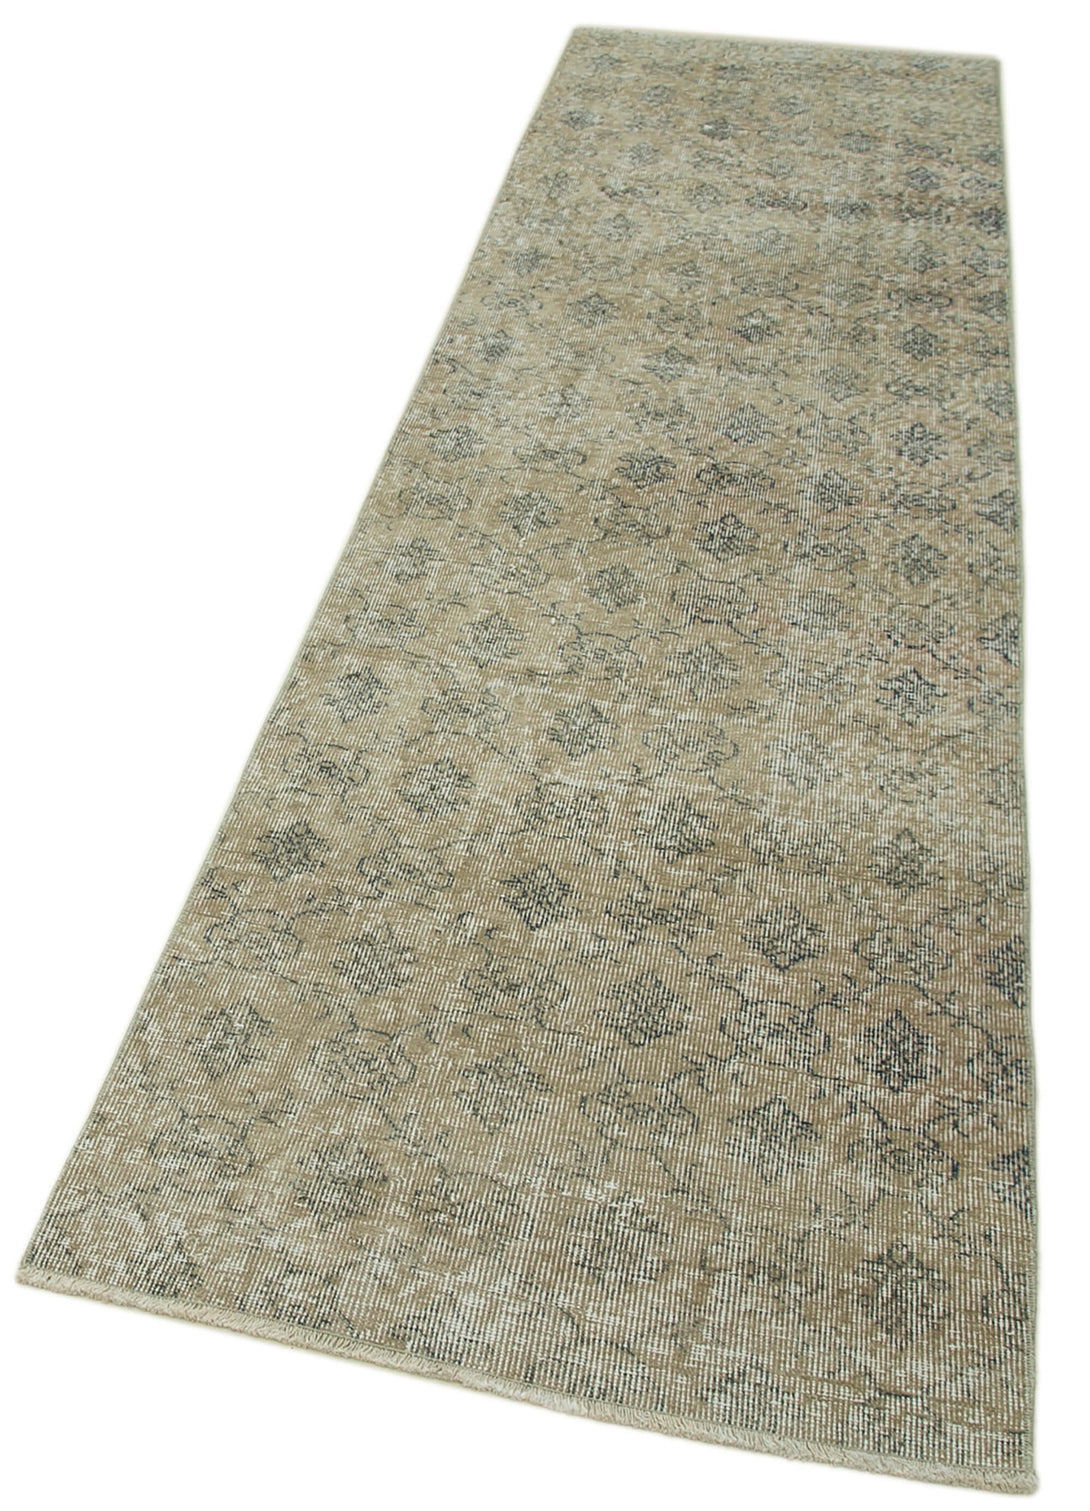 Handmade Overdyed Runner > Design# OL-AC-37178 > Size: 2'-8" x 9'-7", Carpet Culture Rugs, Handmade Rugs, NYC Rugs, New Rugs, Shop Rugs, Rug Store, Outlet Rugs, SoHo Rugs, Rugs in USA